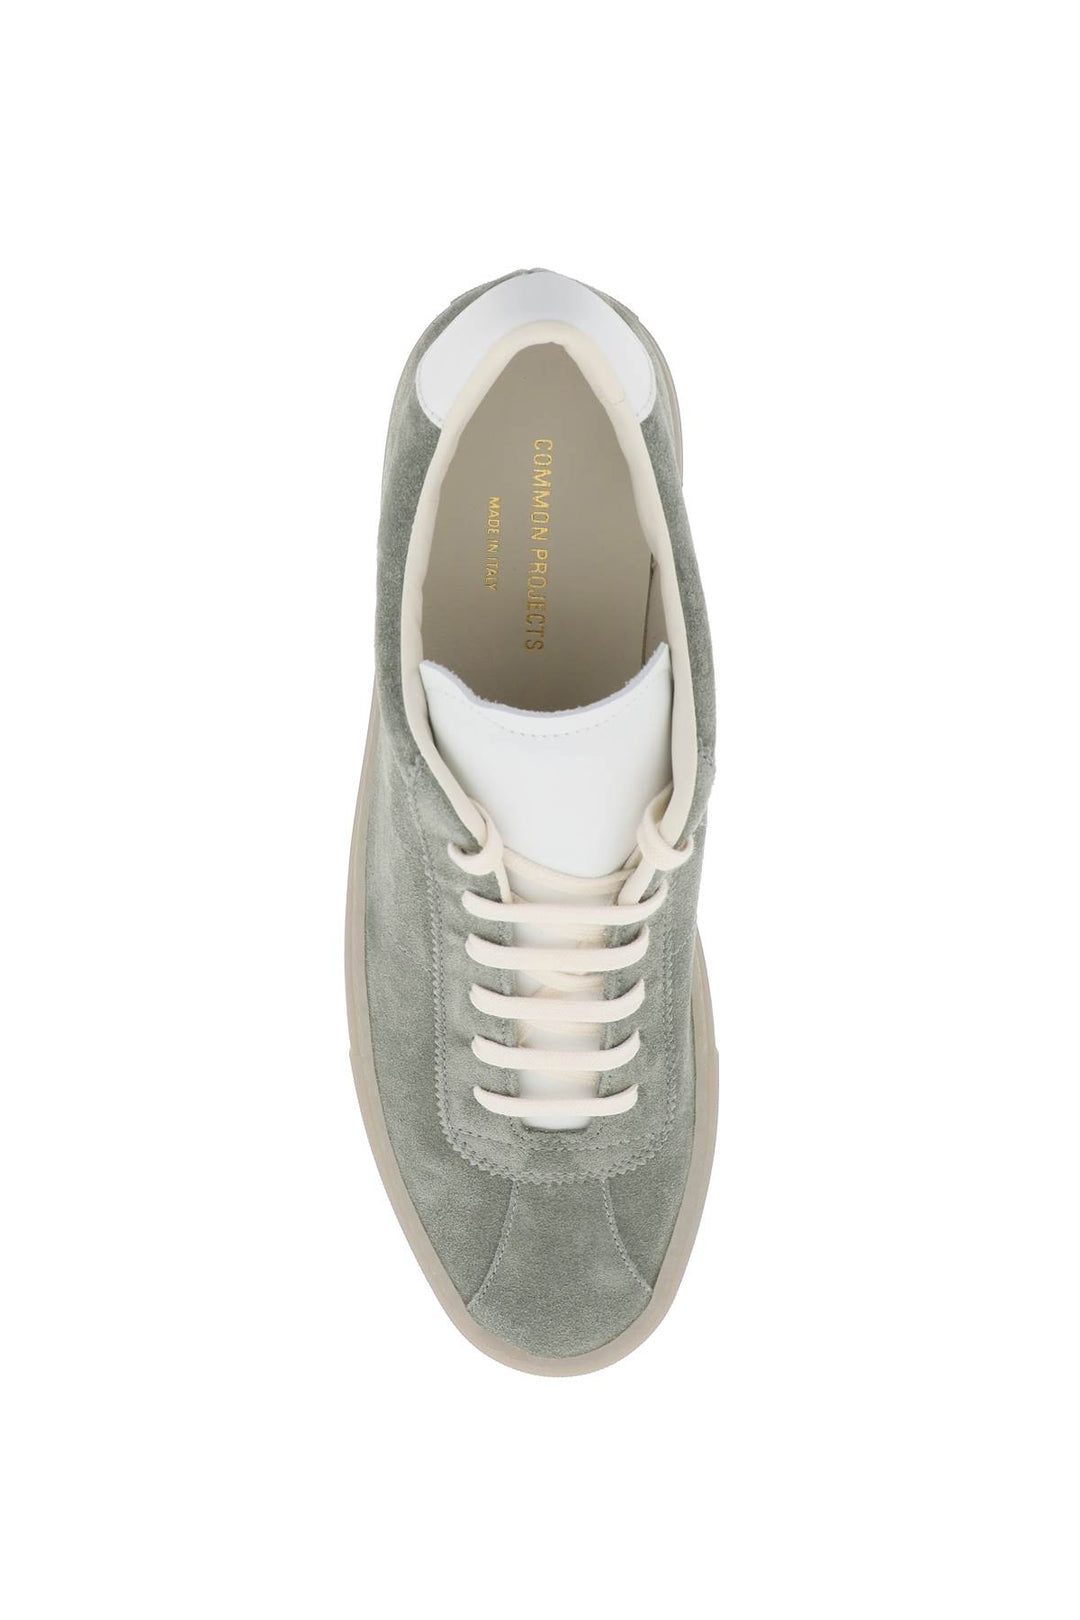 Common Projects 70's Tennis Sneaker   Green